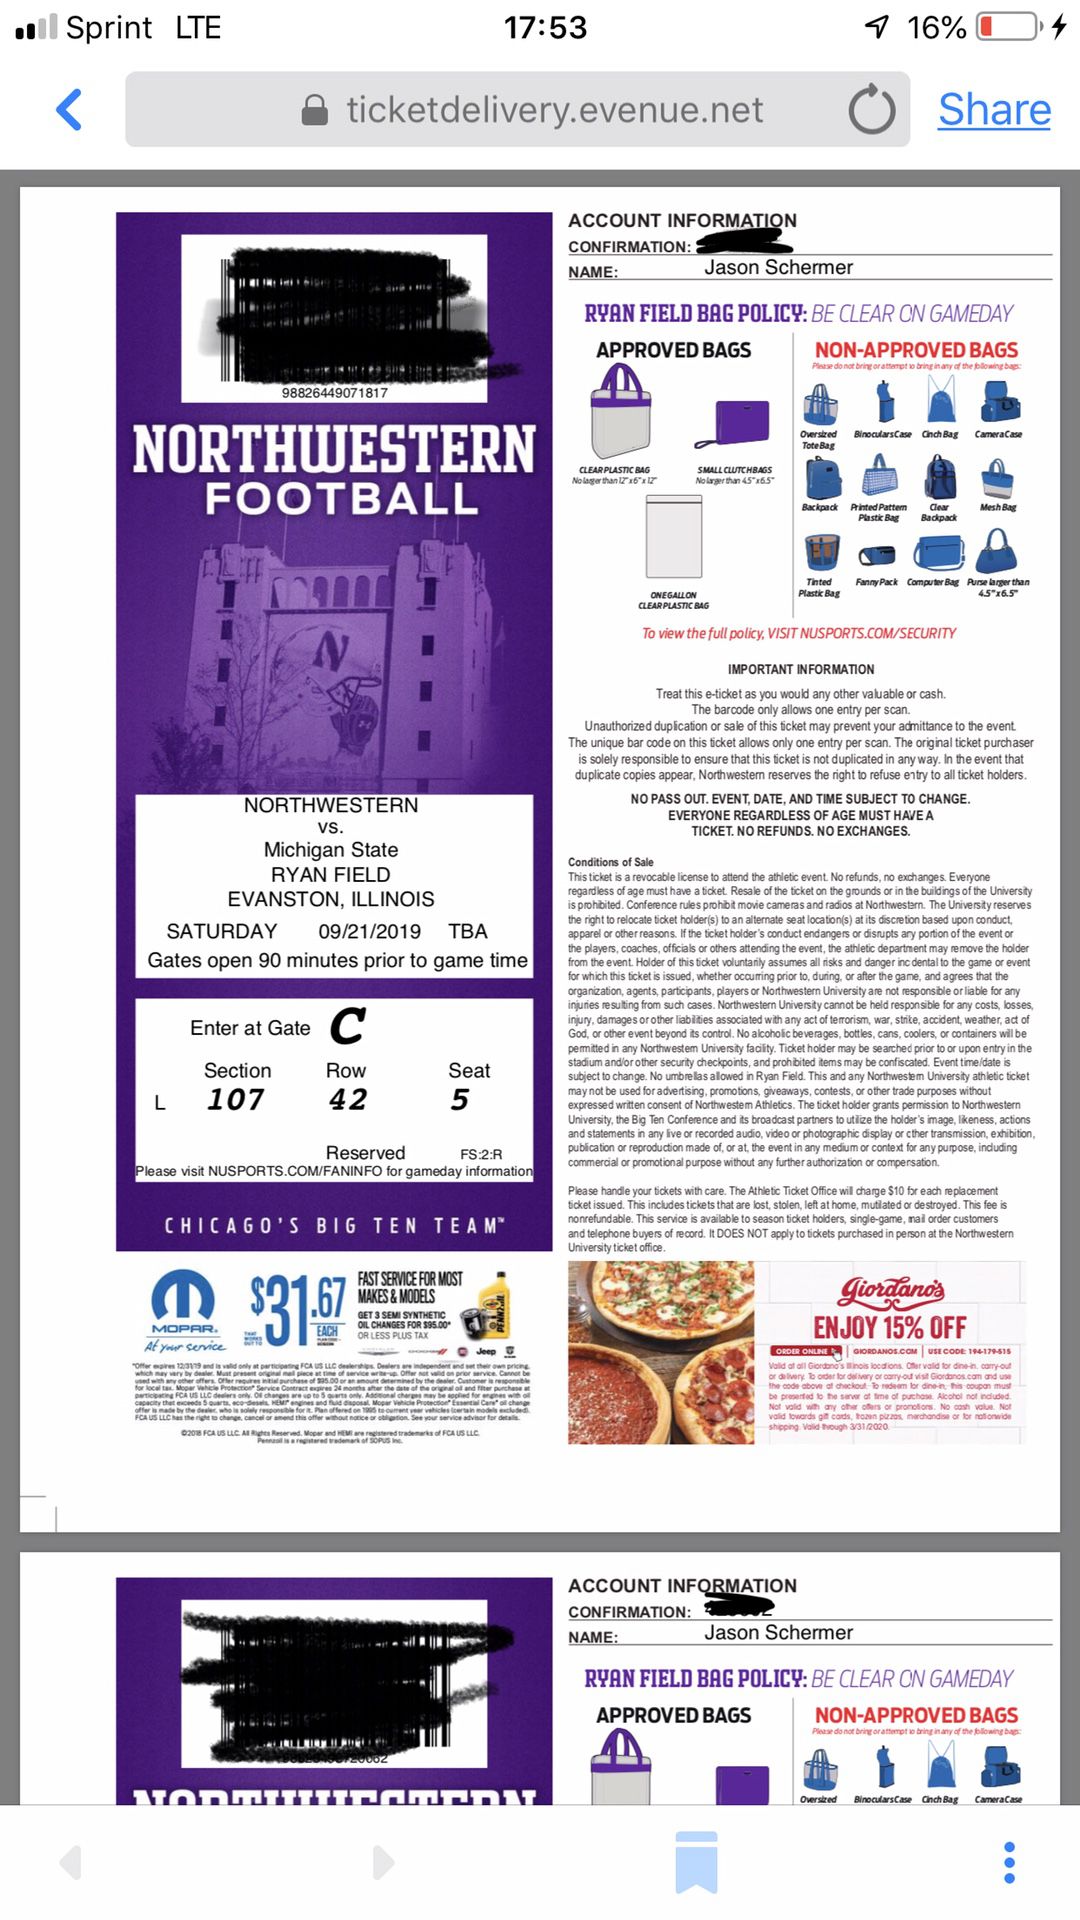 Two tickets for northwestern football game tomorrow at 11am